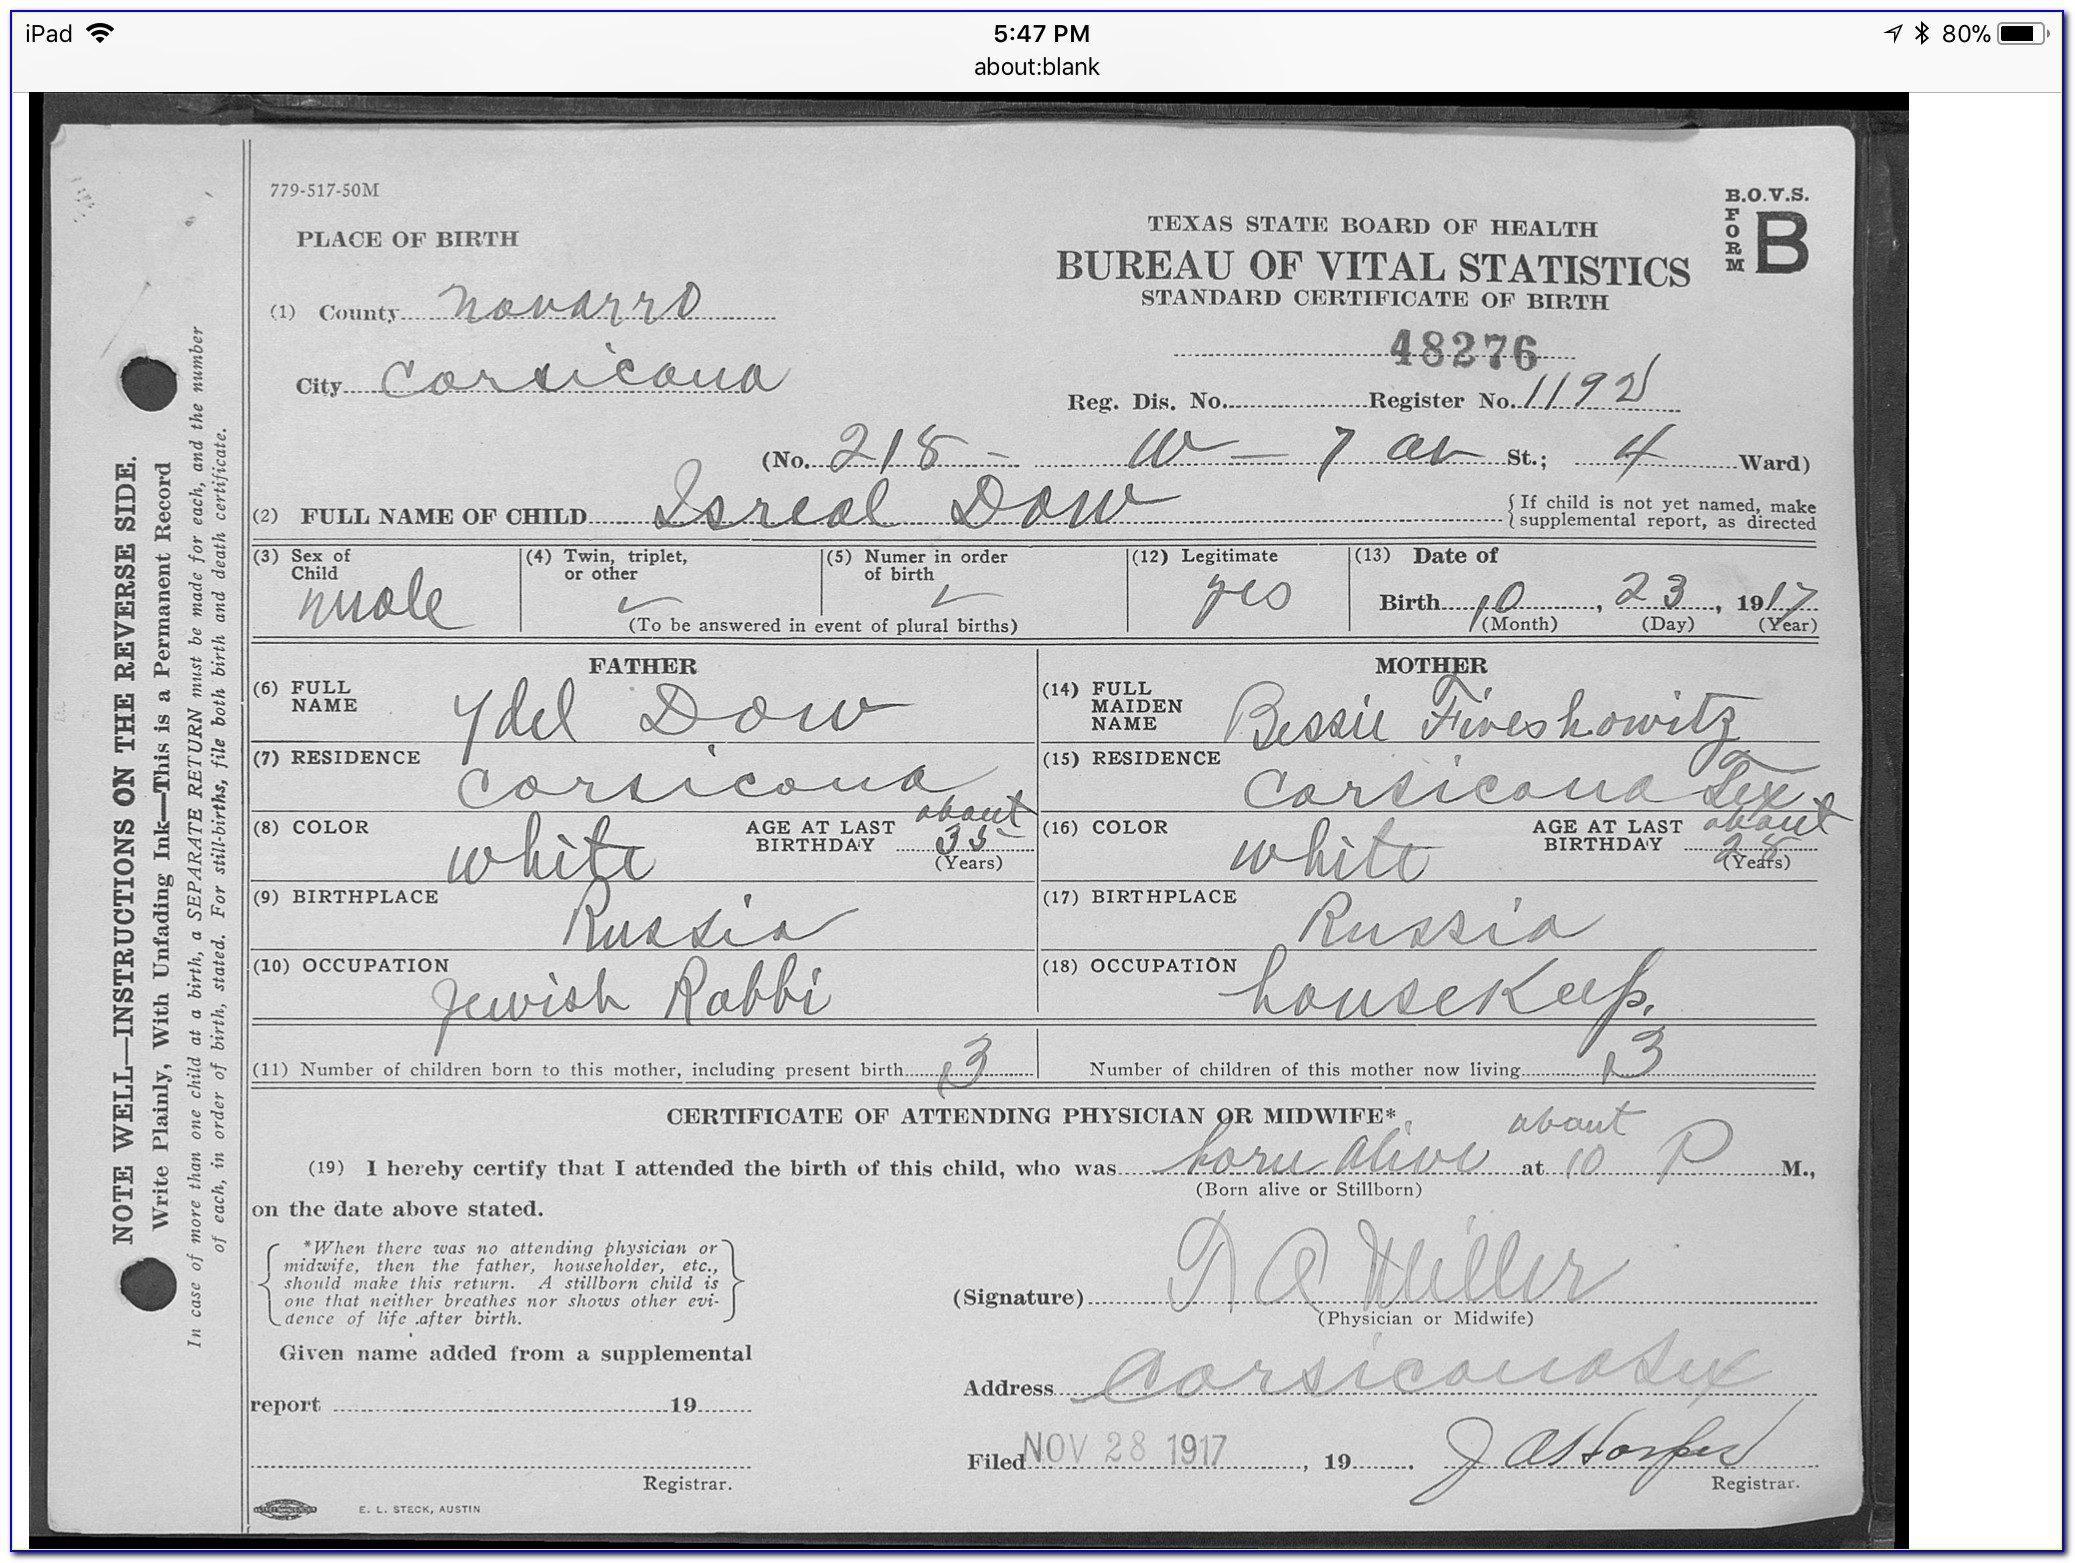 Hood River County Birth Certificate